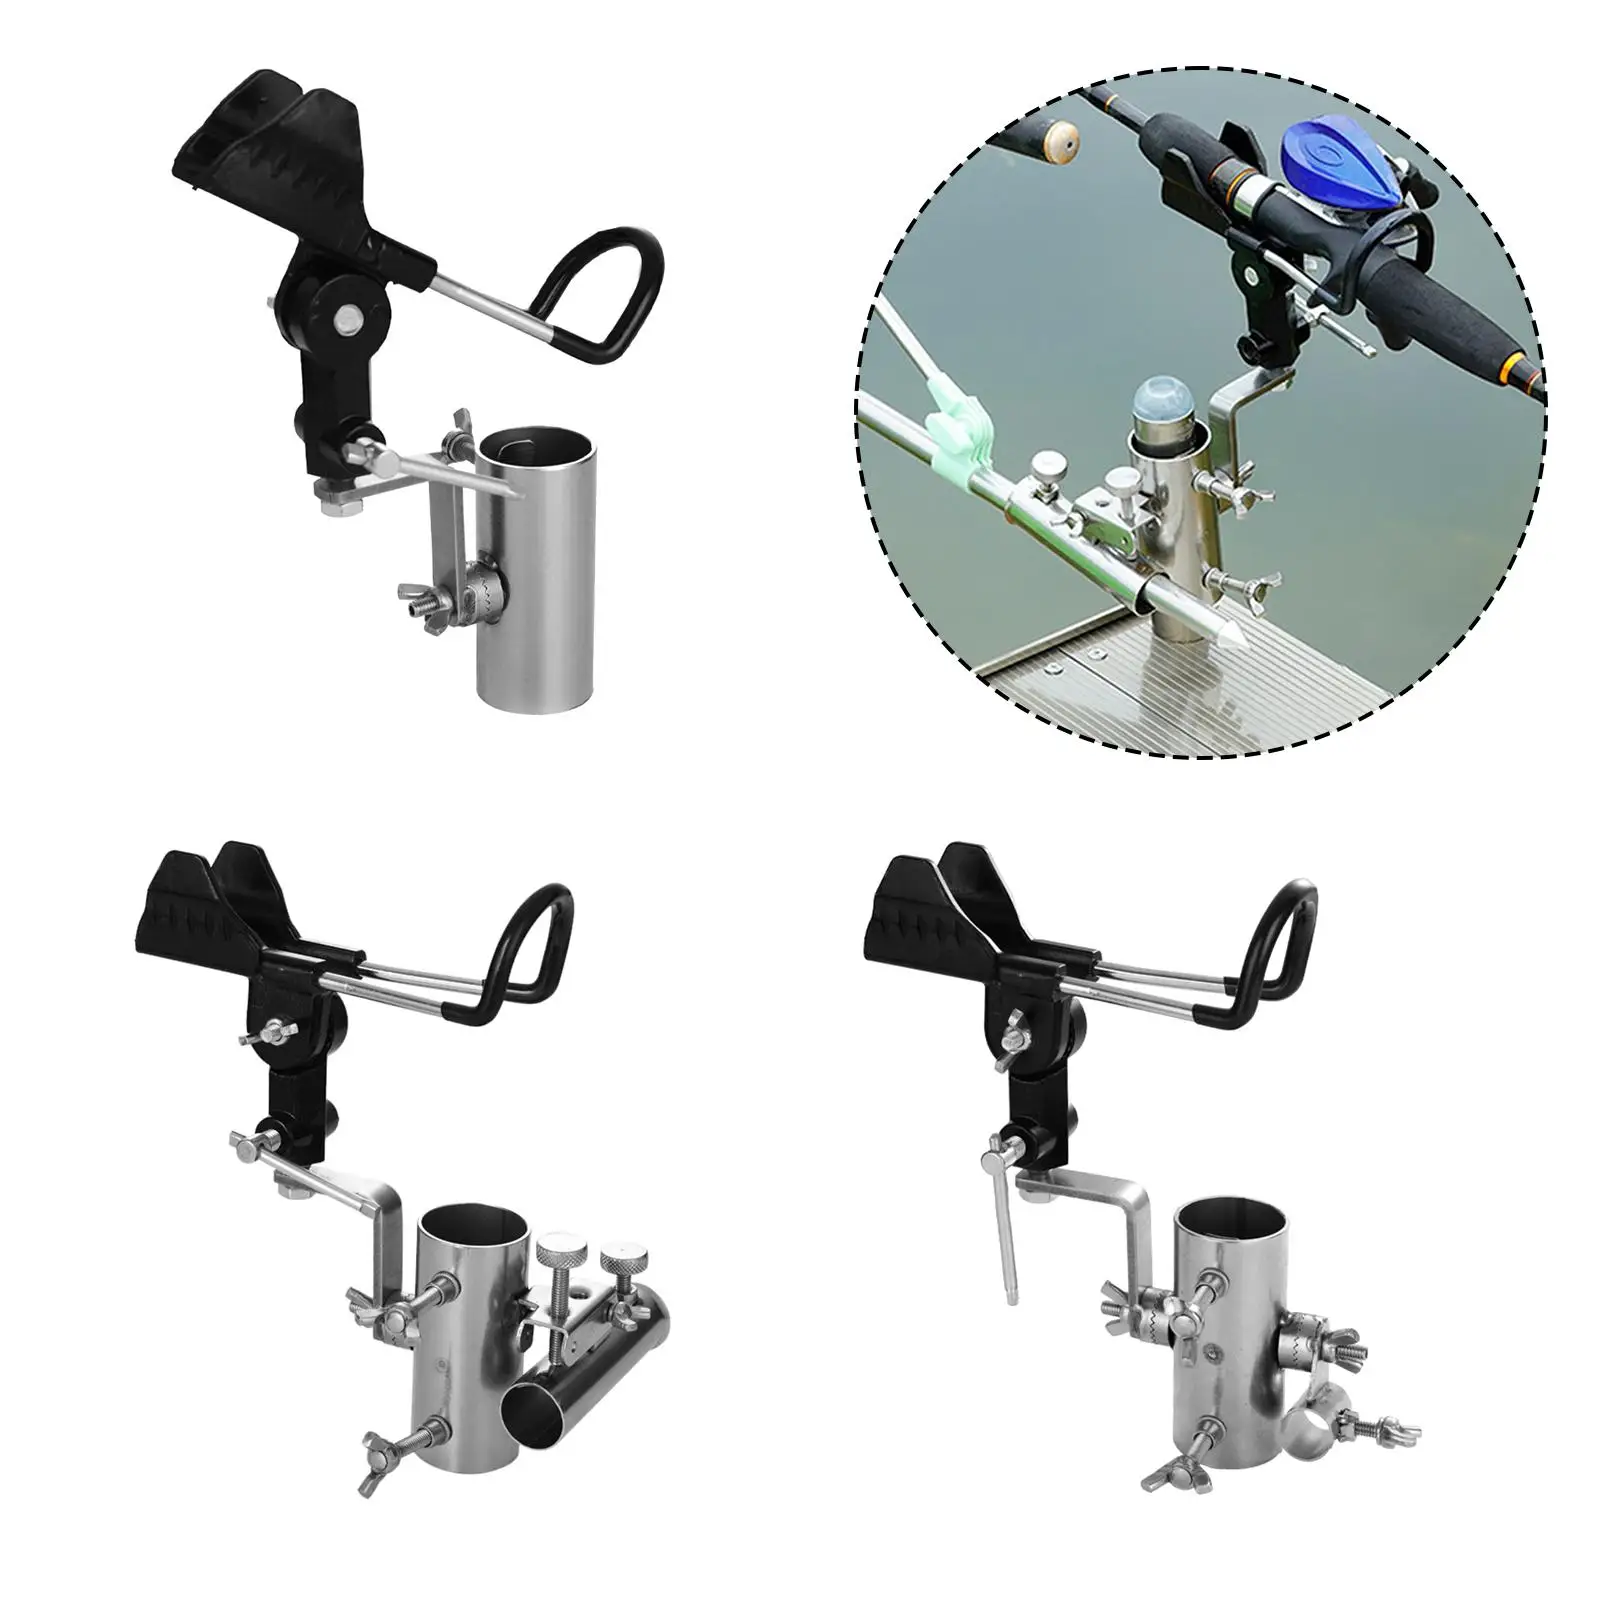 Adjustable Sea Fishing Pole Bracket Tool Metal Stand Support Portable Lightweight Universal Fishing Rod Holder for Outdoor